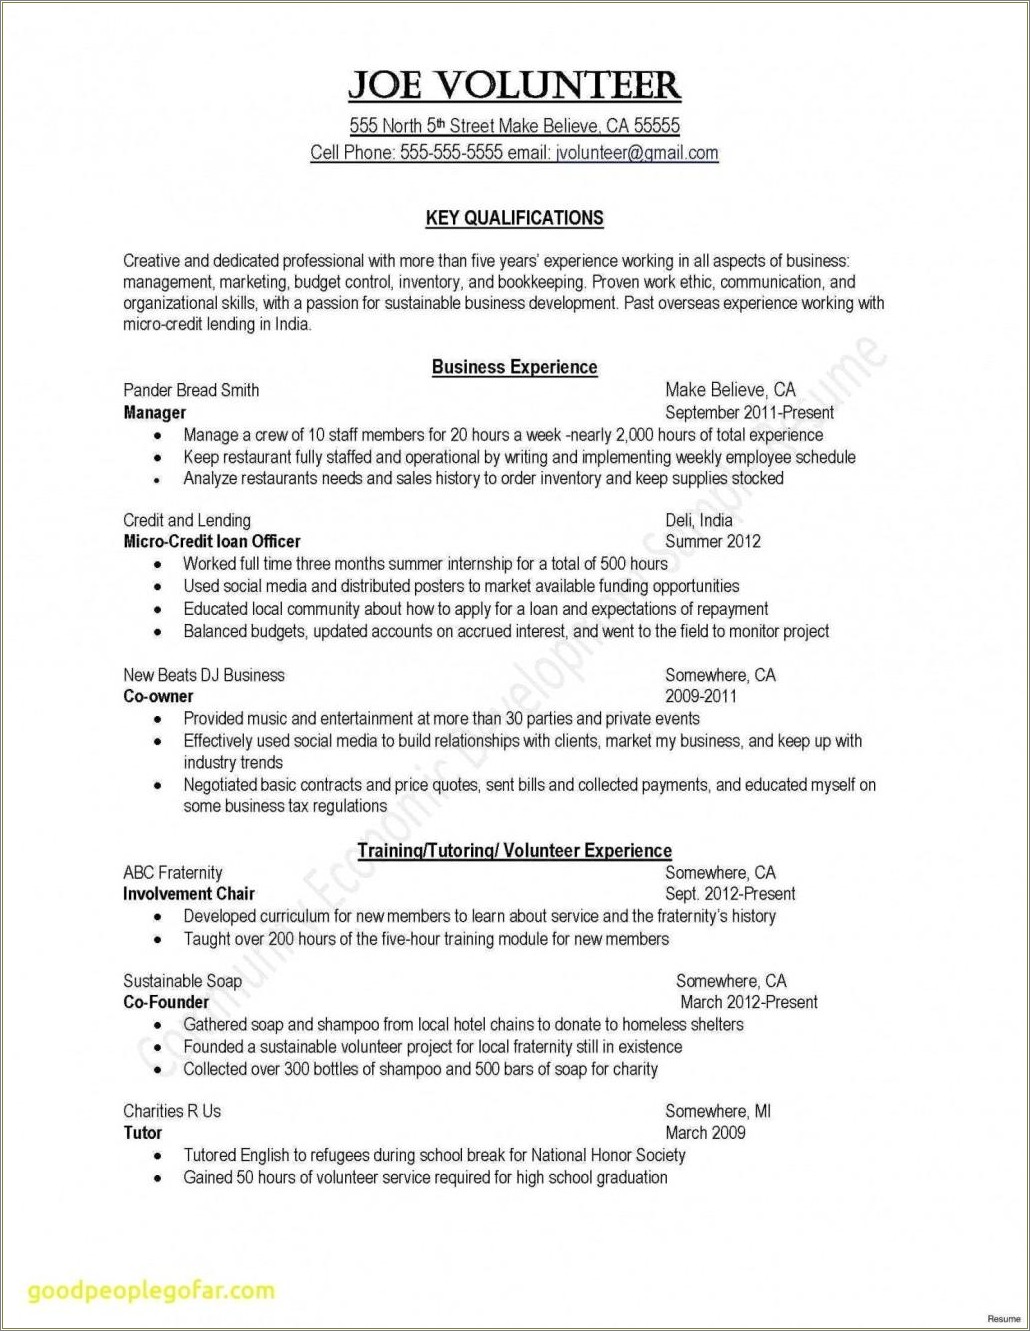 Examples Of Resumes For Working With The Homeless